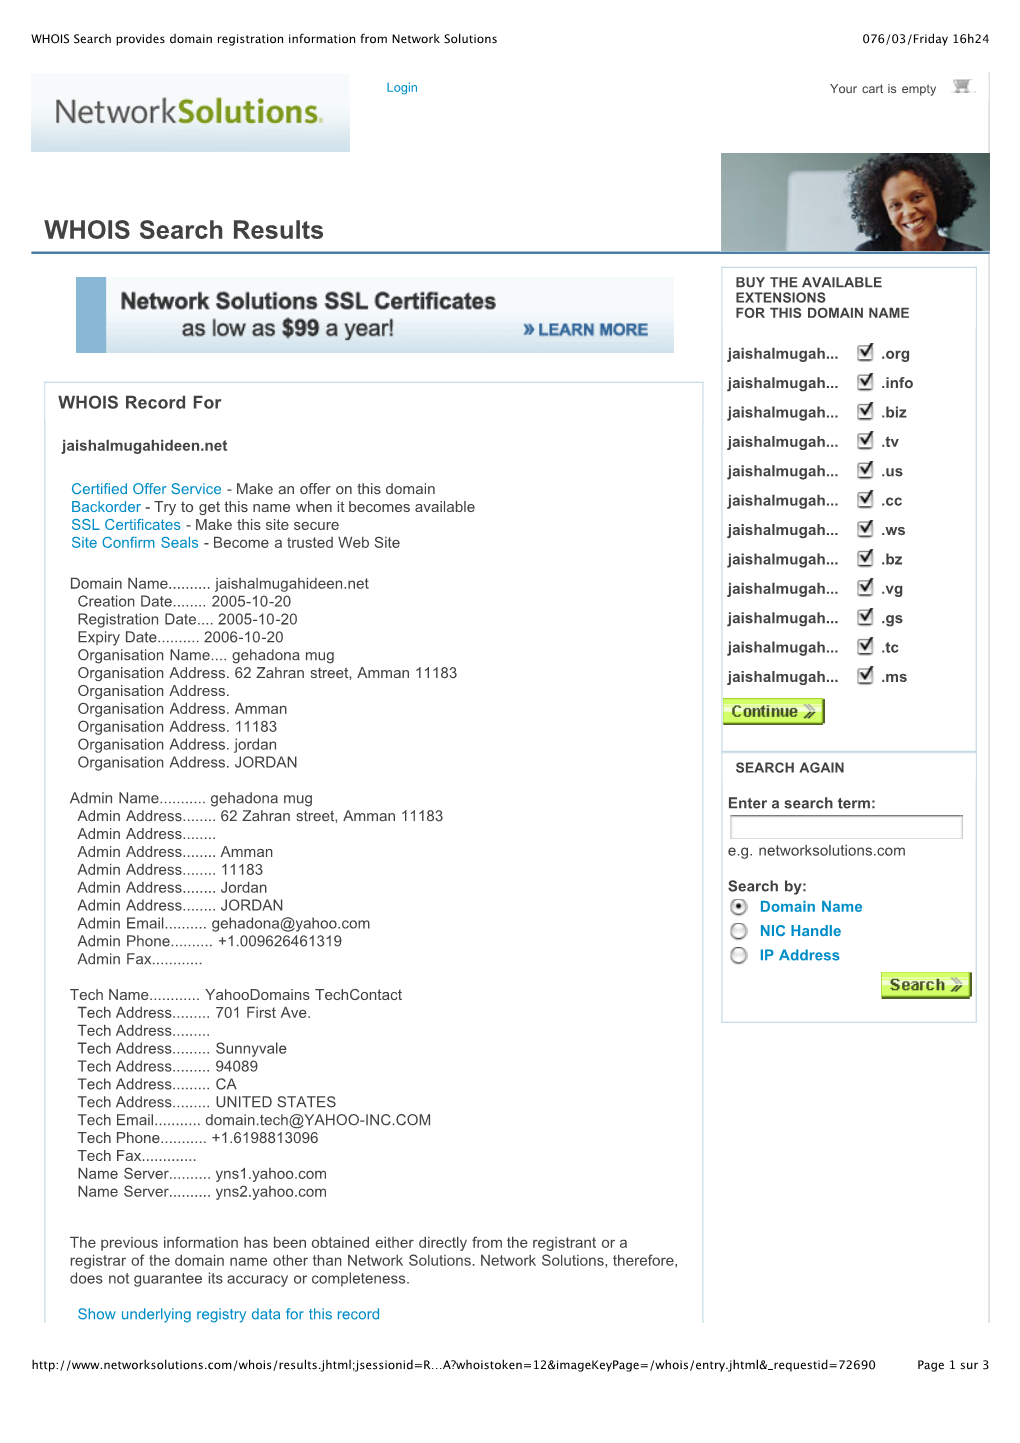 WHOIS Search Provides Domain Registration Information from Network Solutions 076/03/Friday 16H24